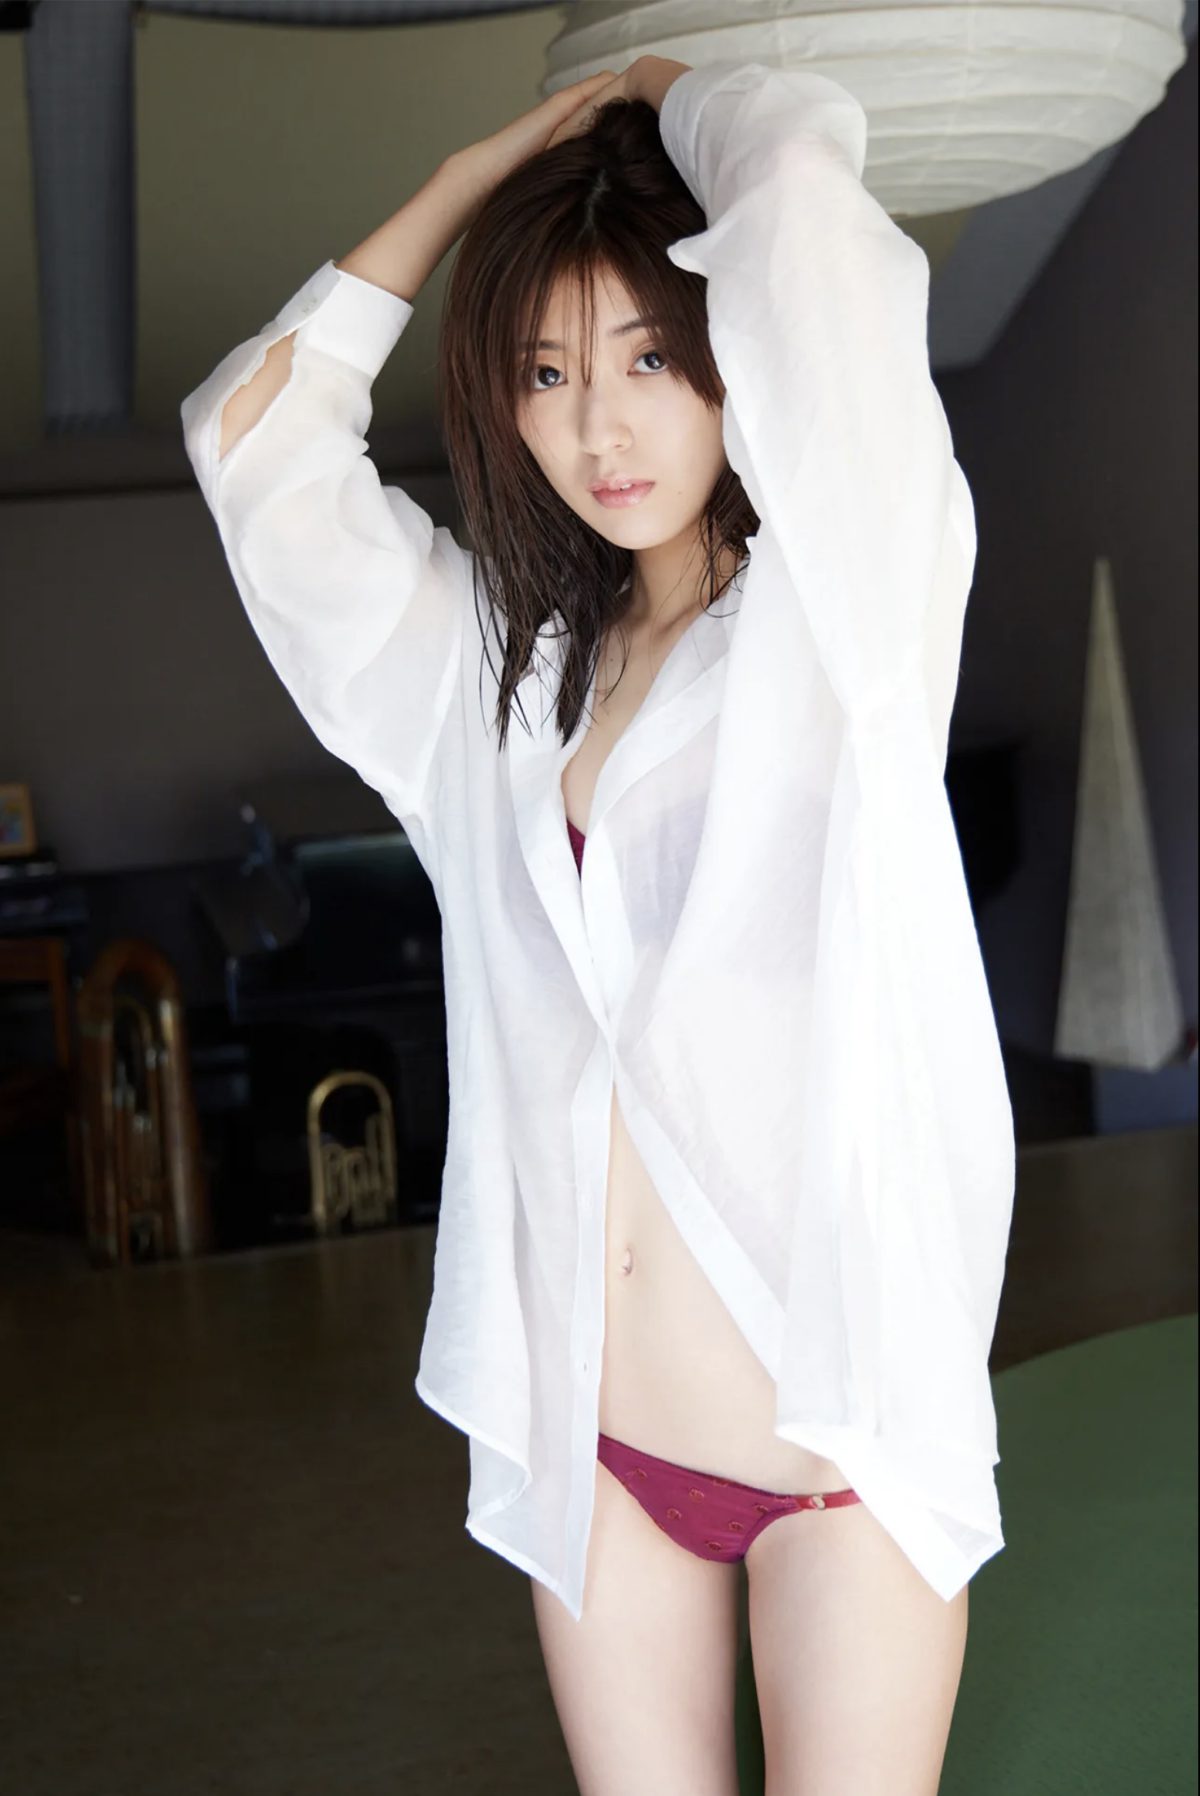 FRIDAY Digital Photobook 2021 03 10 Mio Kudo 工藤美桜 Adult SEXY that fascinates for the first time はじめて魅せる大人ＳＥＸＹ 066 9175995797.jpg